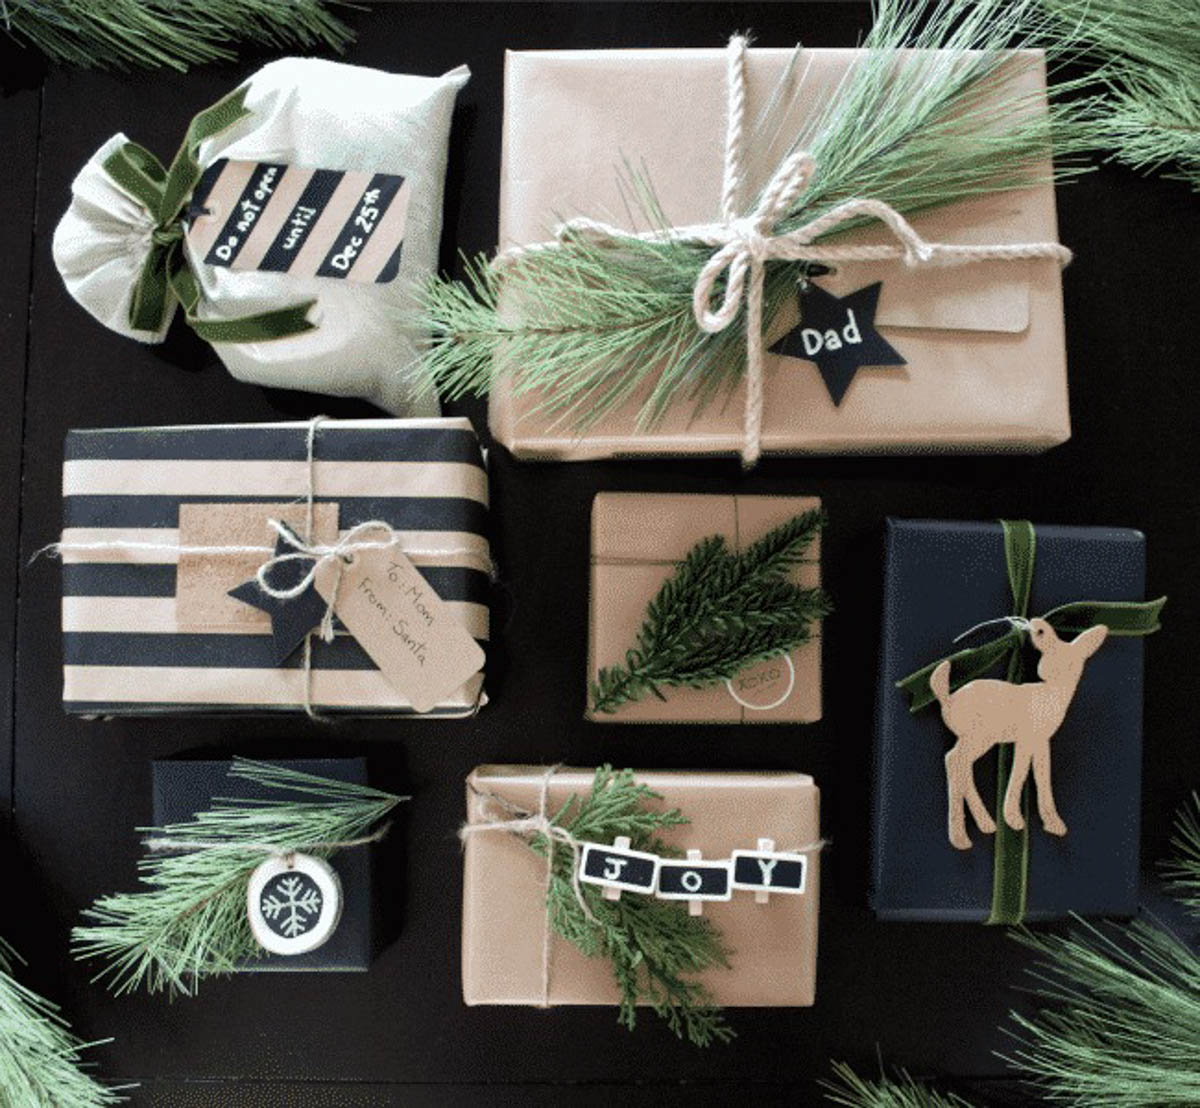 Image of multiple boxes wrapped in rustic gift wrapping paper